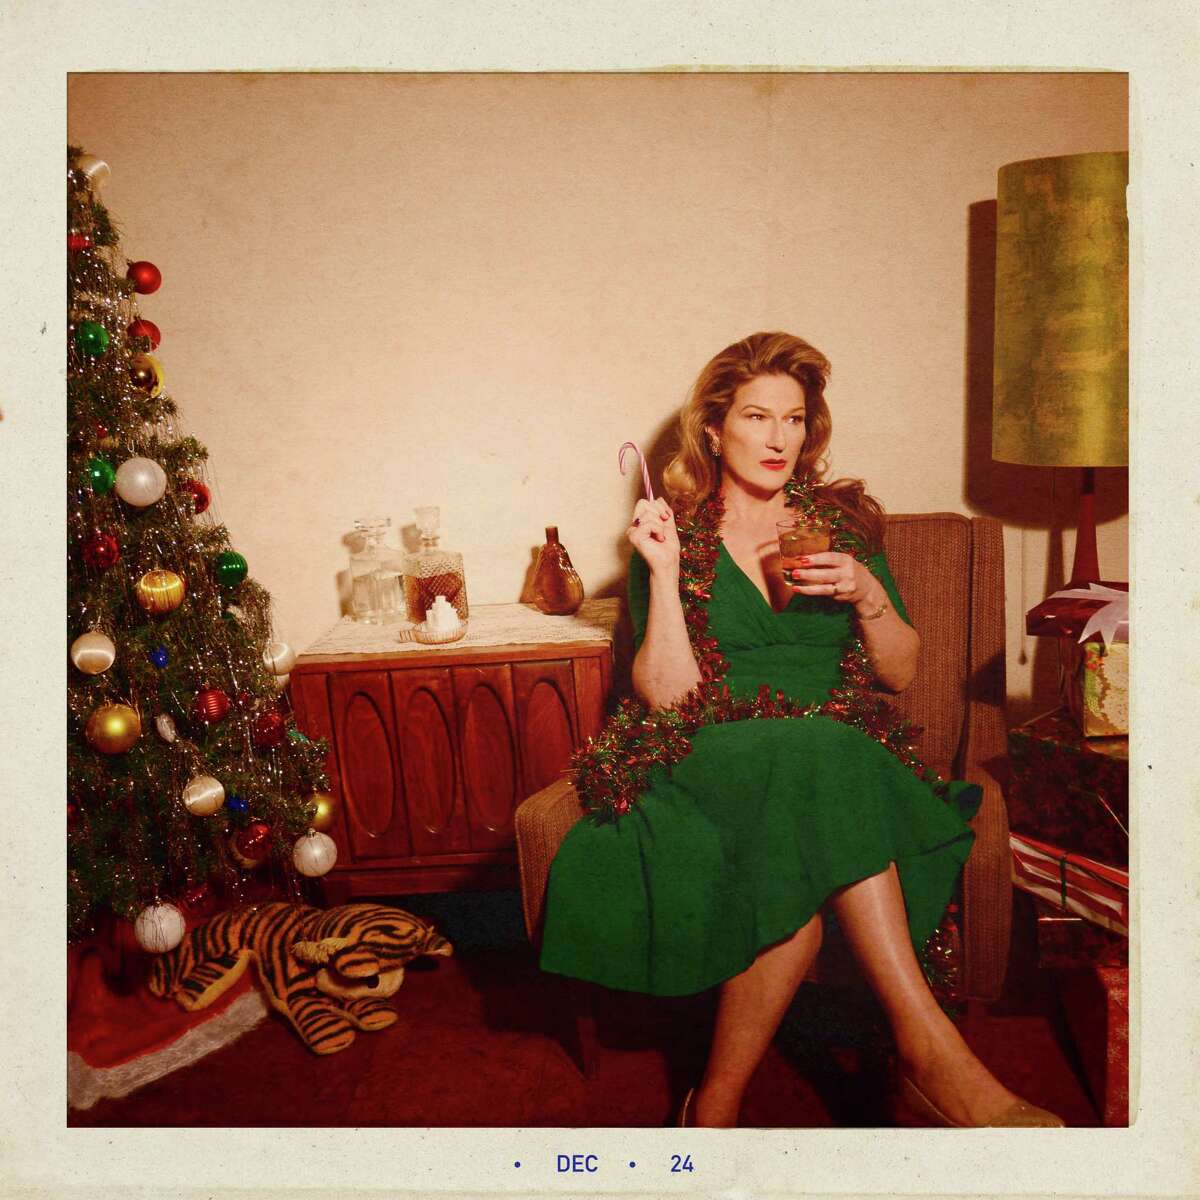 Ana Gasteyer: Sugar and Booze is on Dec. 18 at 8 p.m. at the Ridgefield Playhouse, 80 East Ridge Road, Ridgefield. Tickets are $45. For more information, visit ridgefieldplayhouse.org.